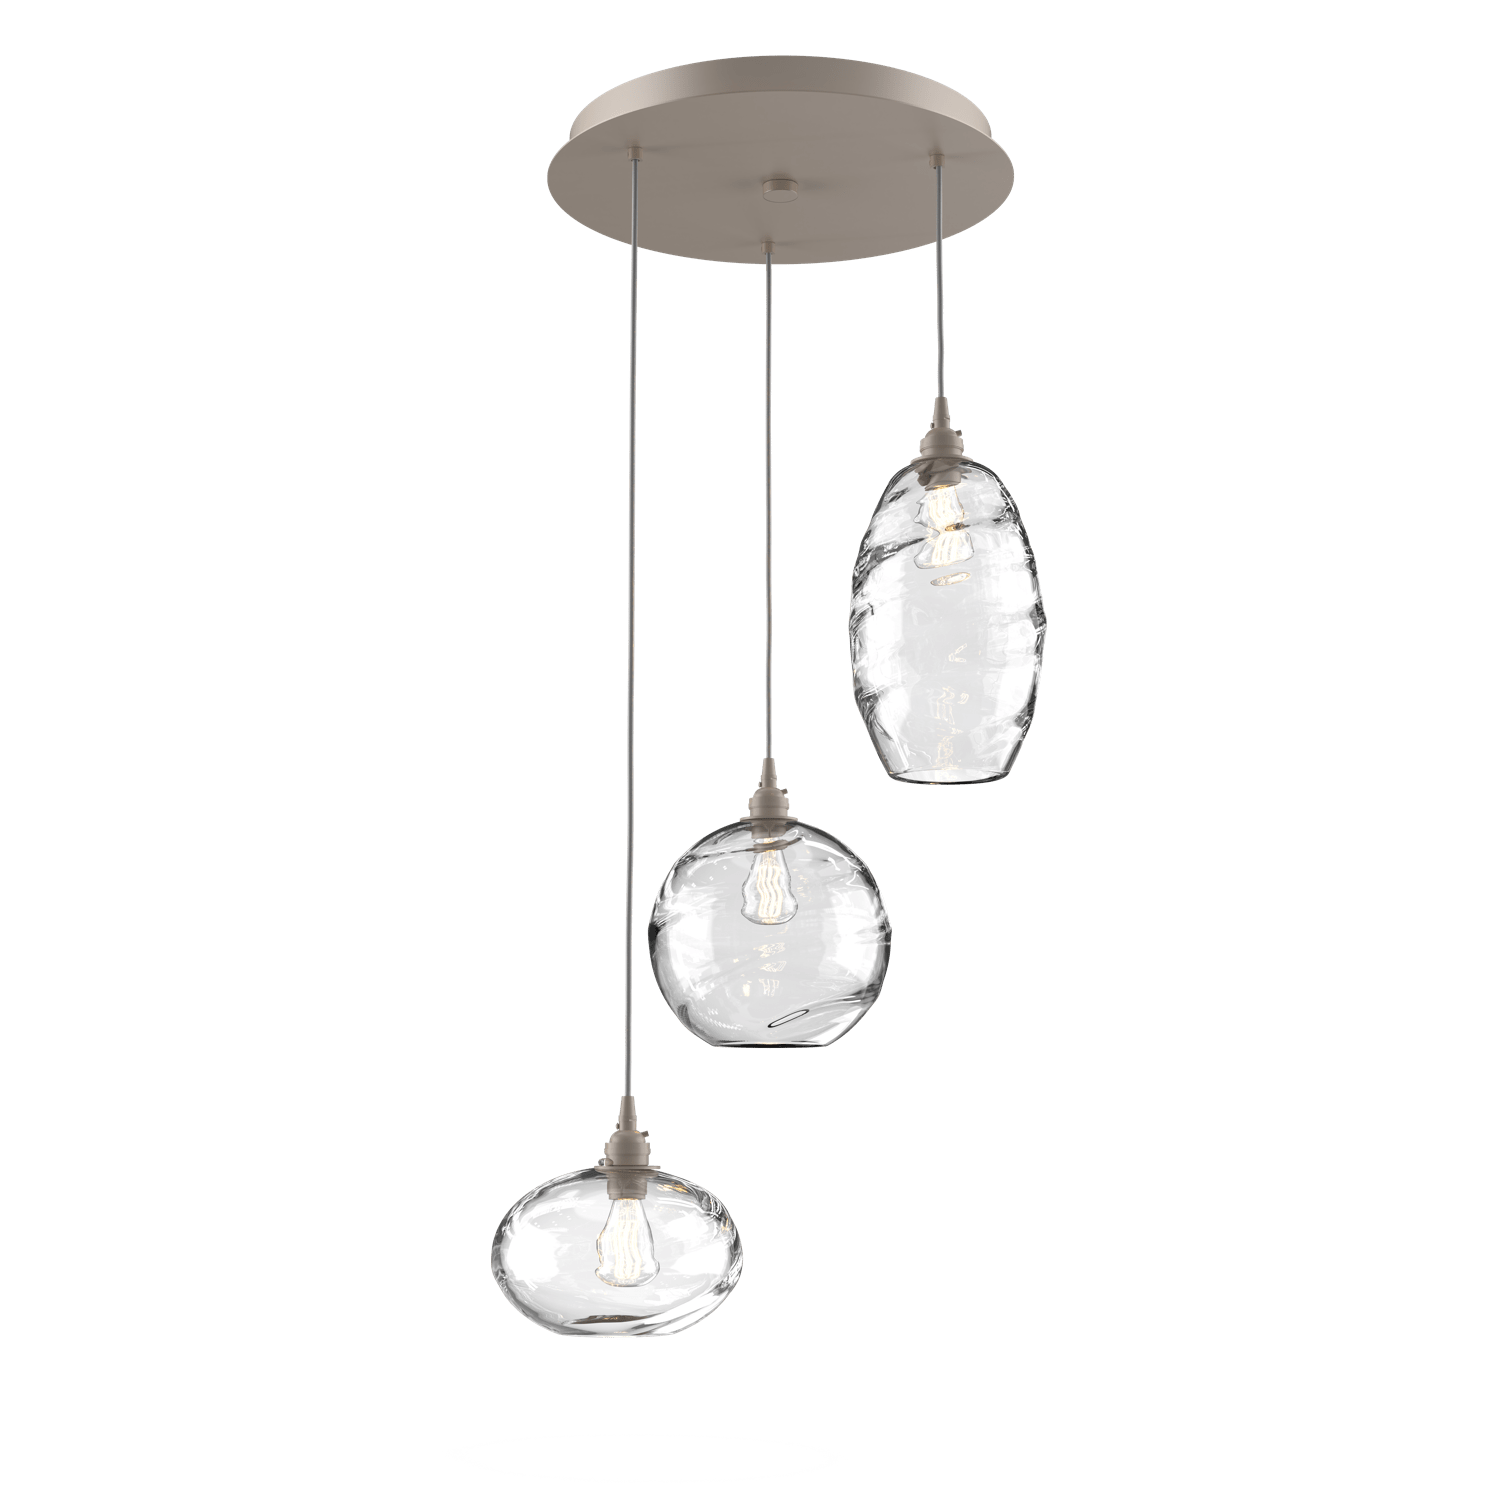 CHB0048-03-BS-OC-Hammerton-Studio-Optic-Blown-Glass-Misto-3-light-round-pendant-chandelier-with-metallic-beige-silver-finish-and-optic-clear-blown-glass-shades-and-incandescent-lamping